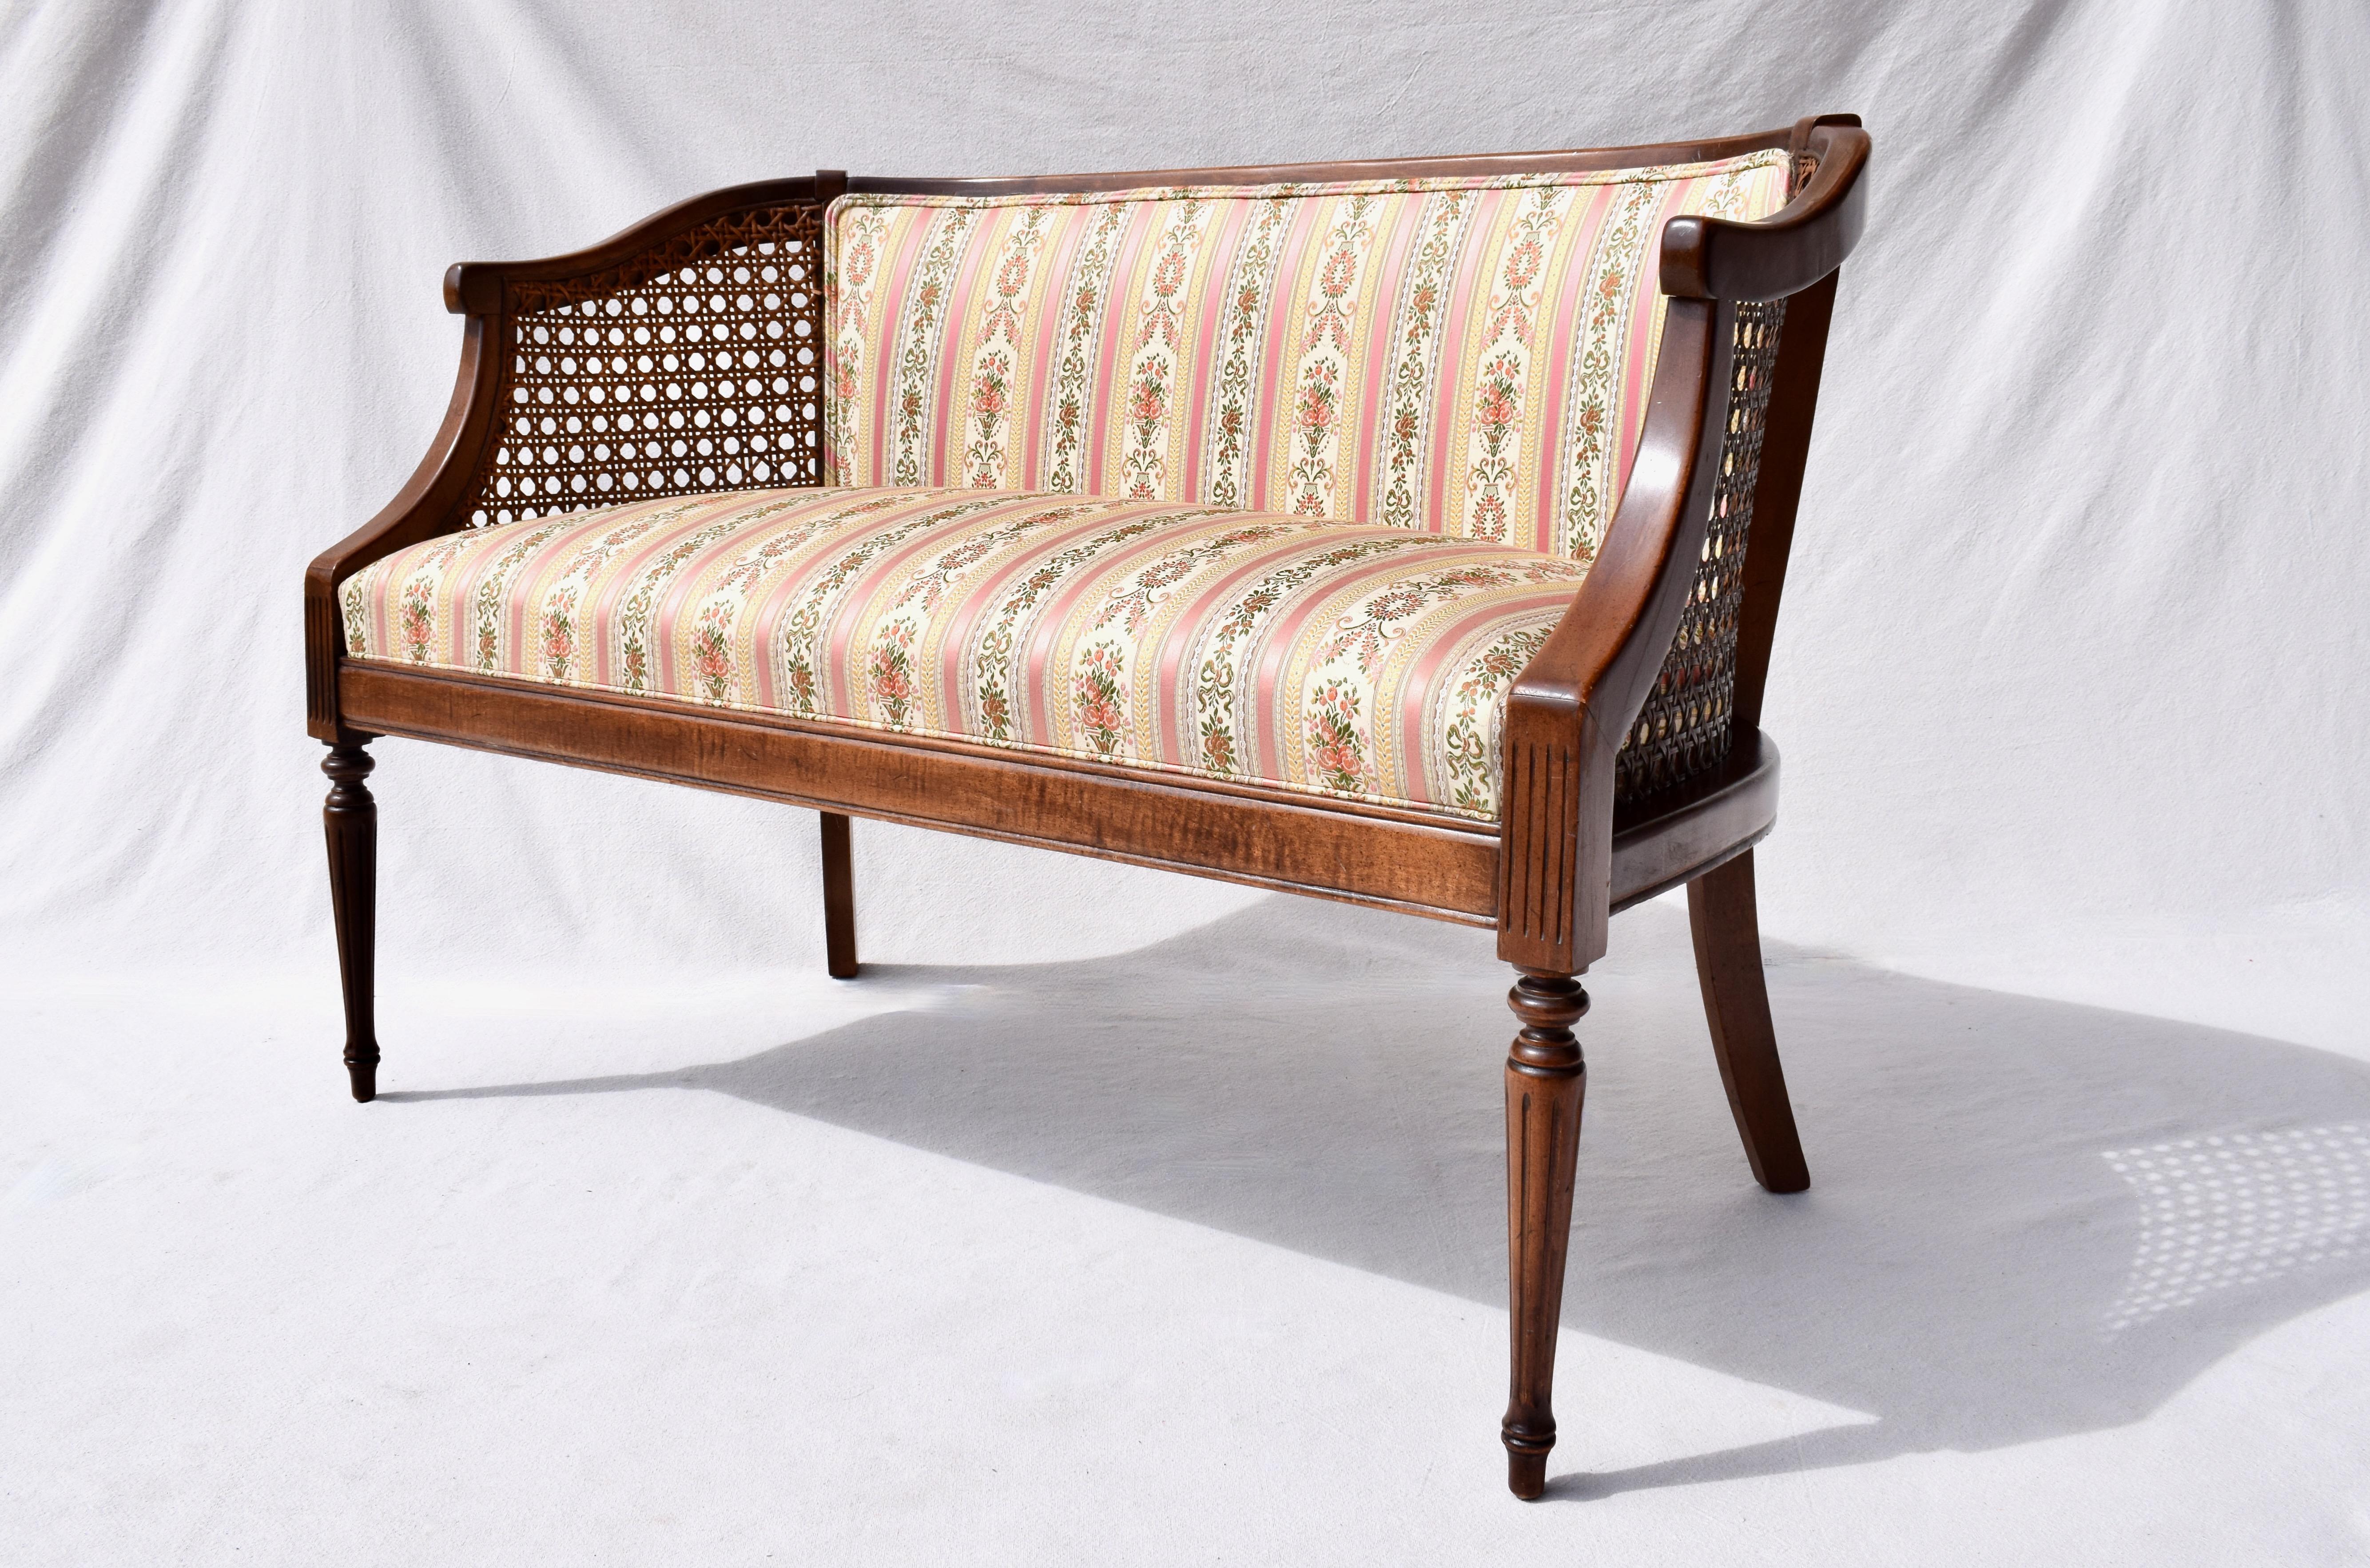 20th Century French Louis XVI Style Cane Curve Back Settee For Sale